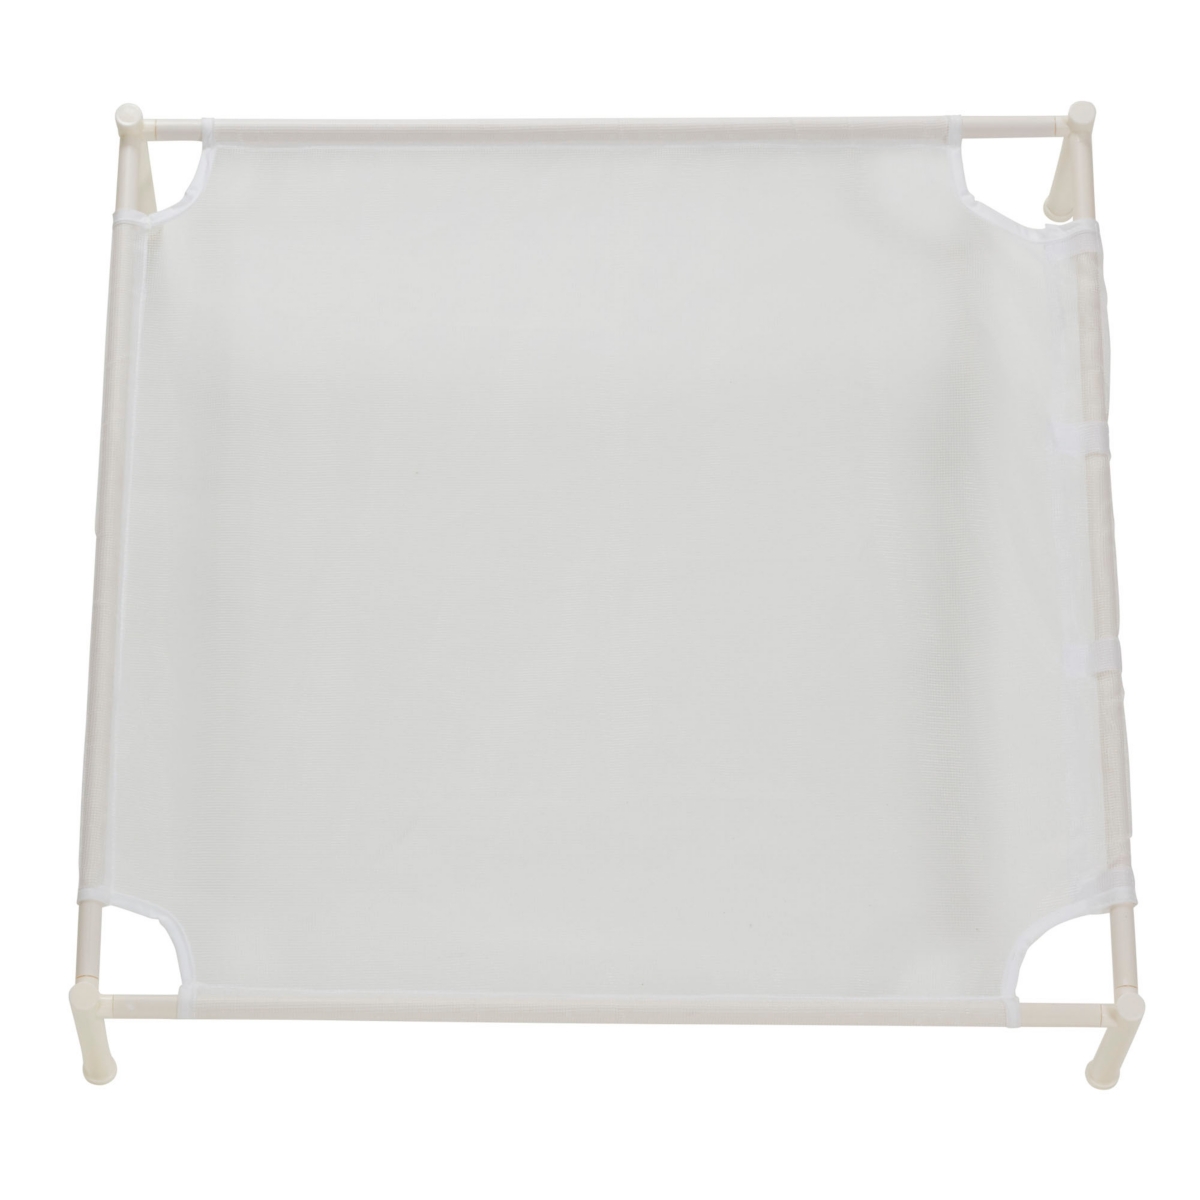 UPC 040071040048 product image for Household Essentials Stackable Laundry Drying Rack | upcitemdb.com